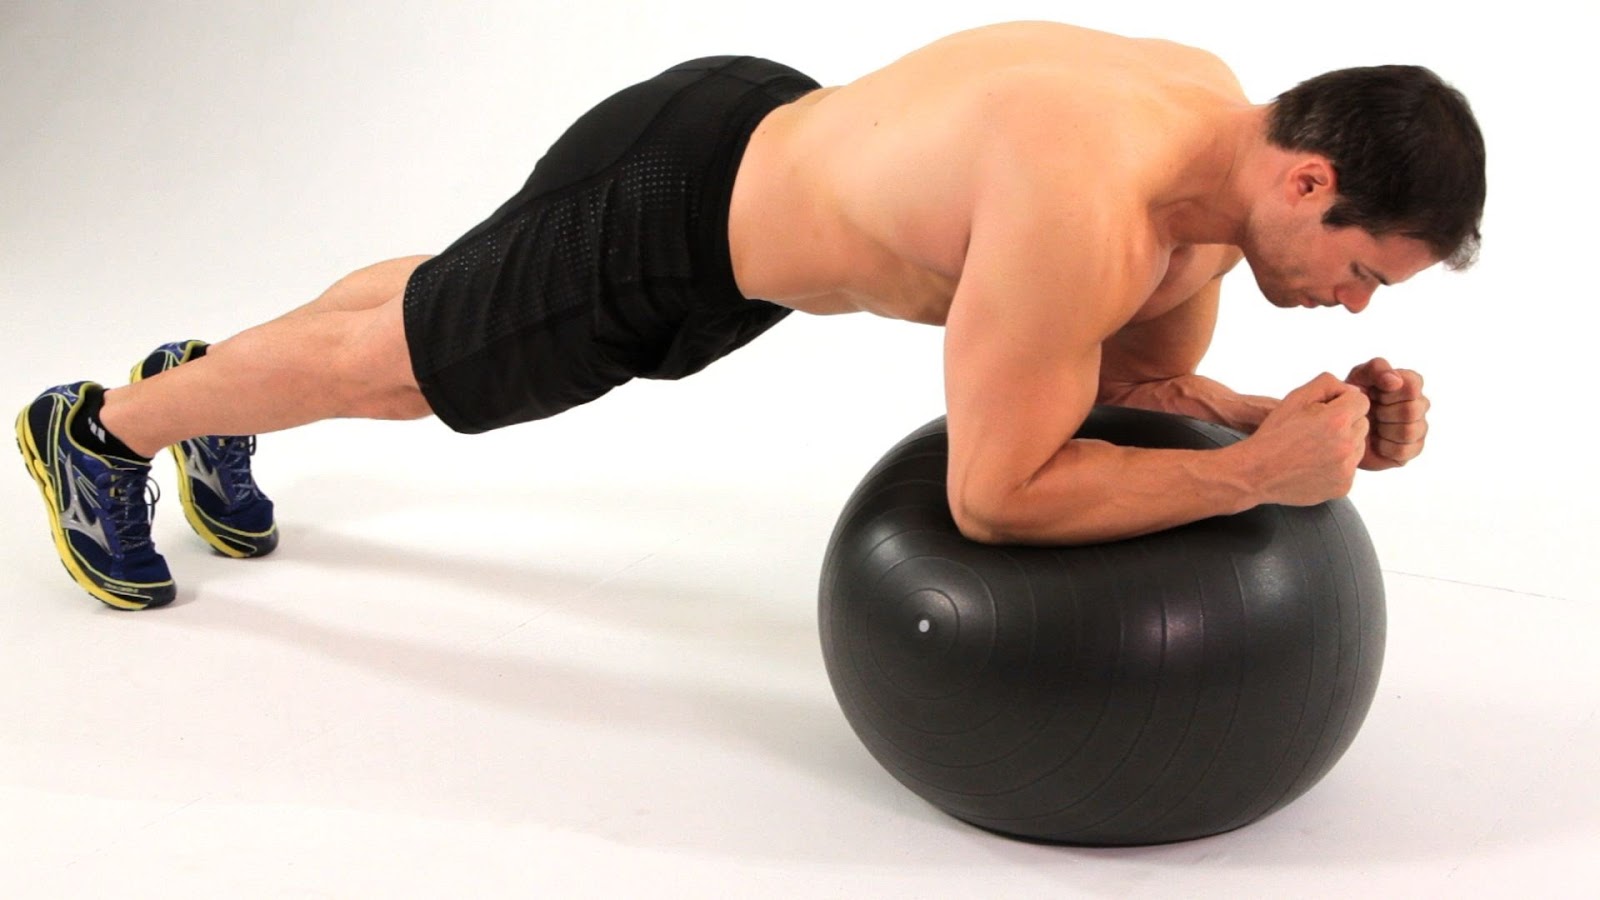 An Excellent Way Of Training With The Exercise Ball - Training.